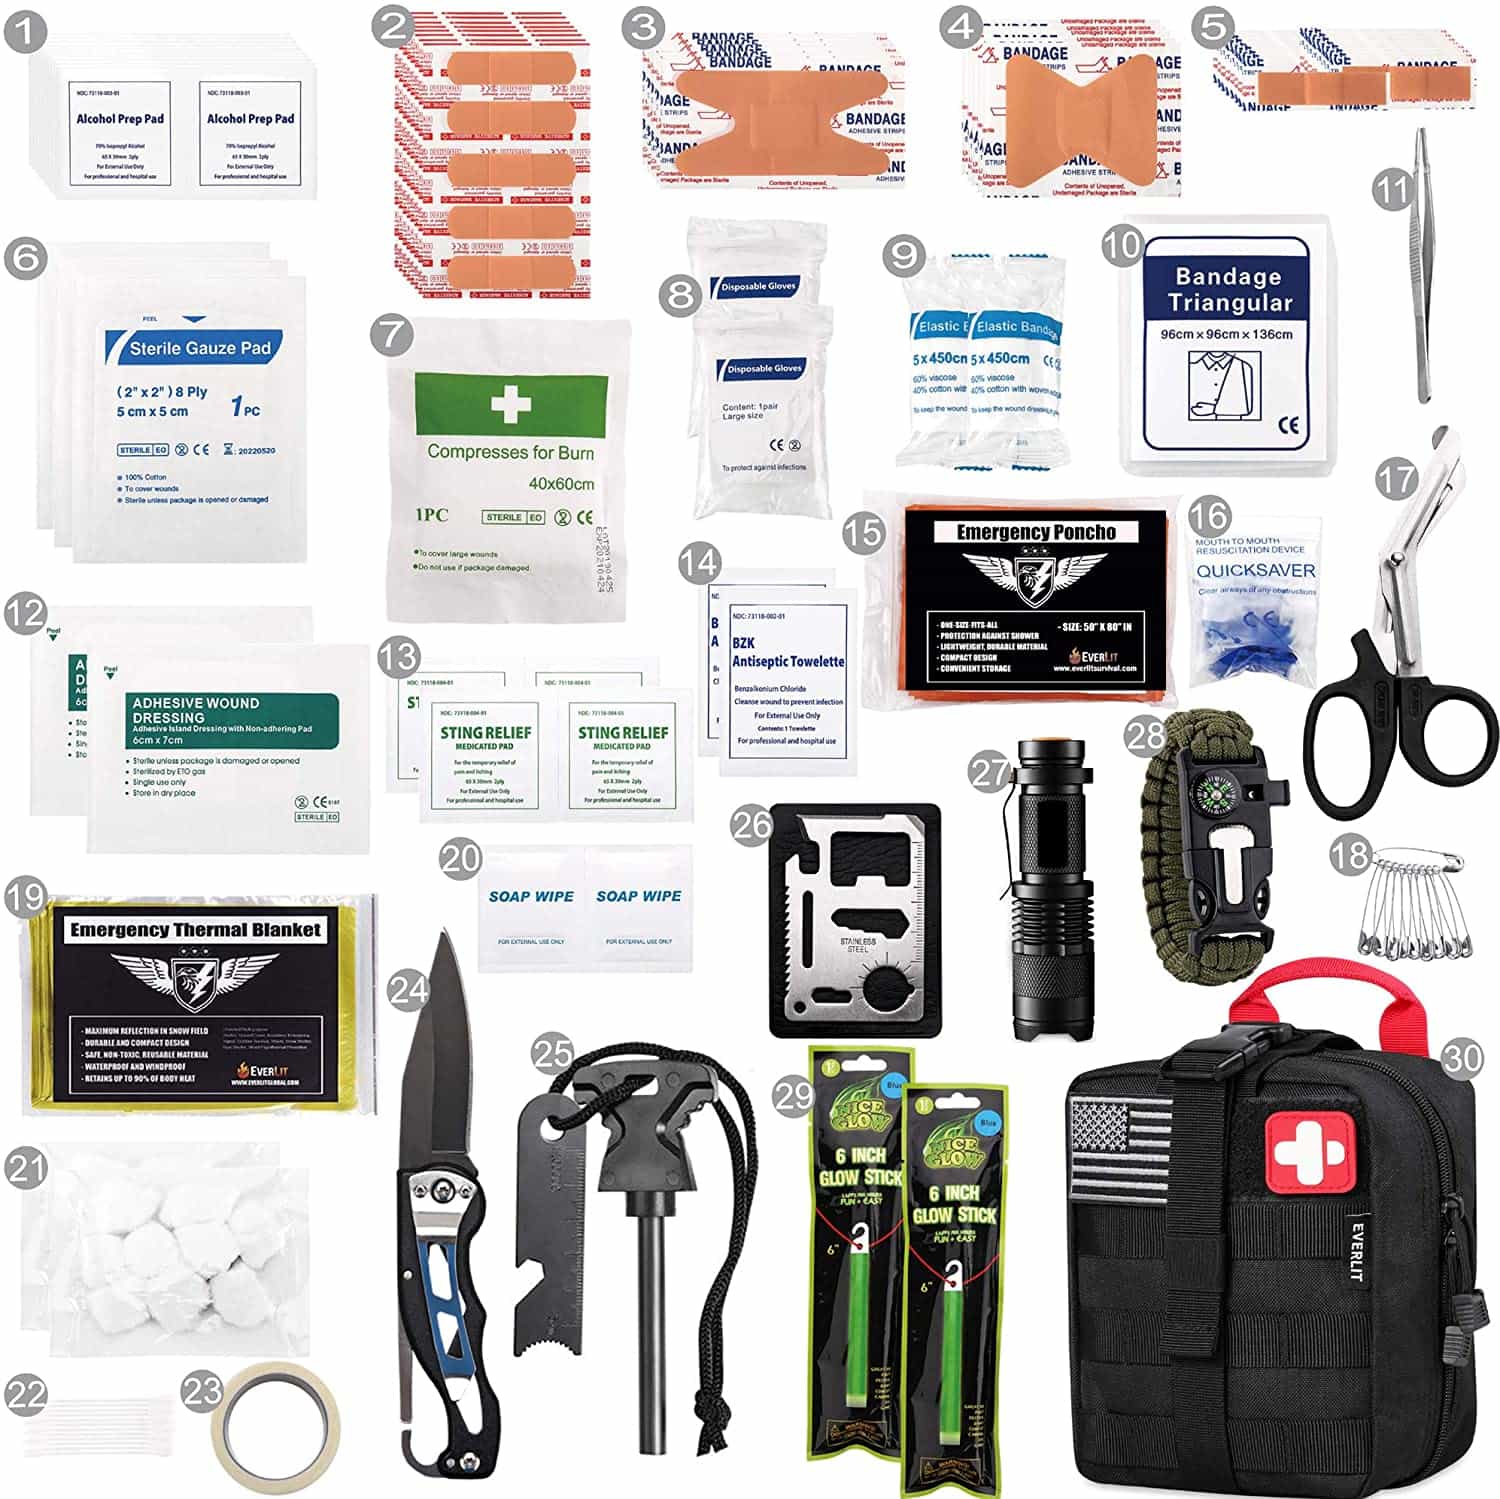 Black Survival First Aid Kit Contains Contains 250 Piece First Aid Kit - 1 